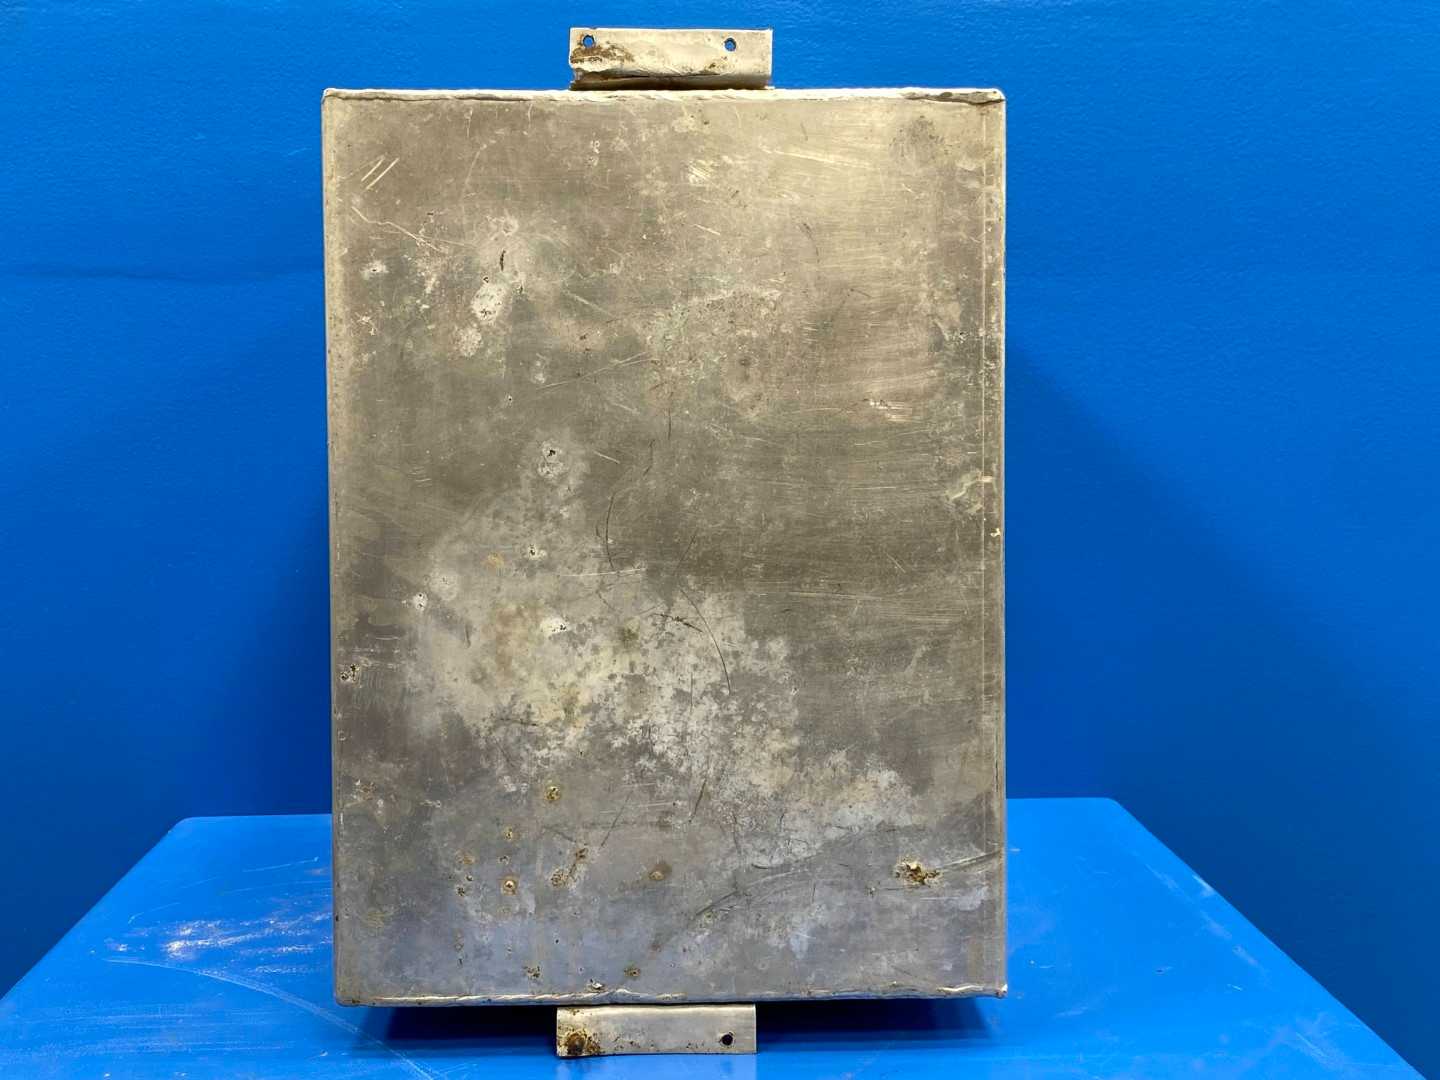 Fuel Tank AFP Aluminum Fabricated Products 04-18B-OF